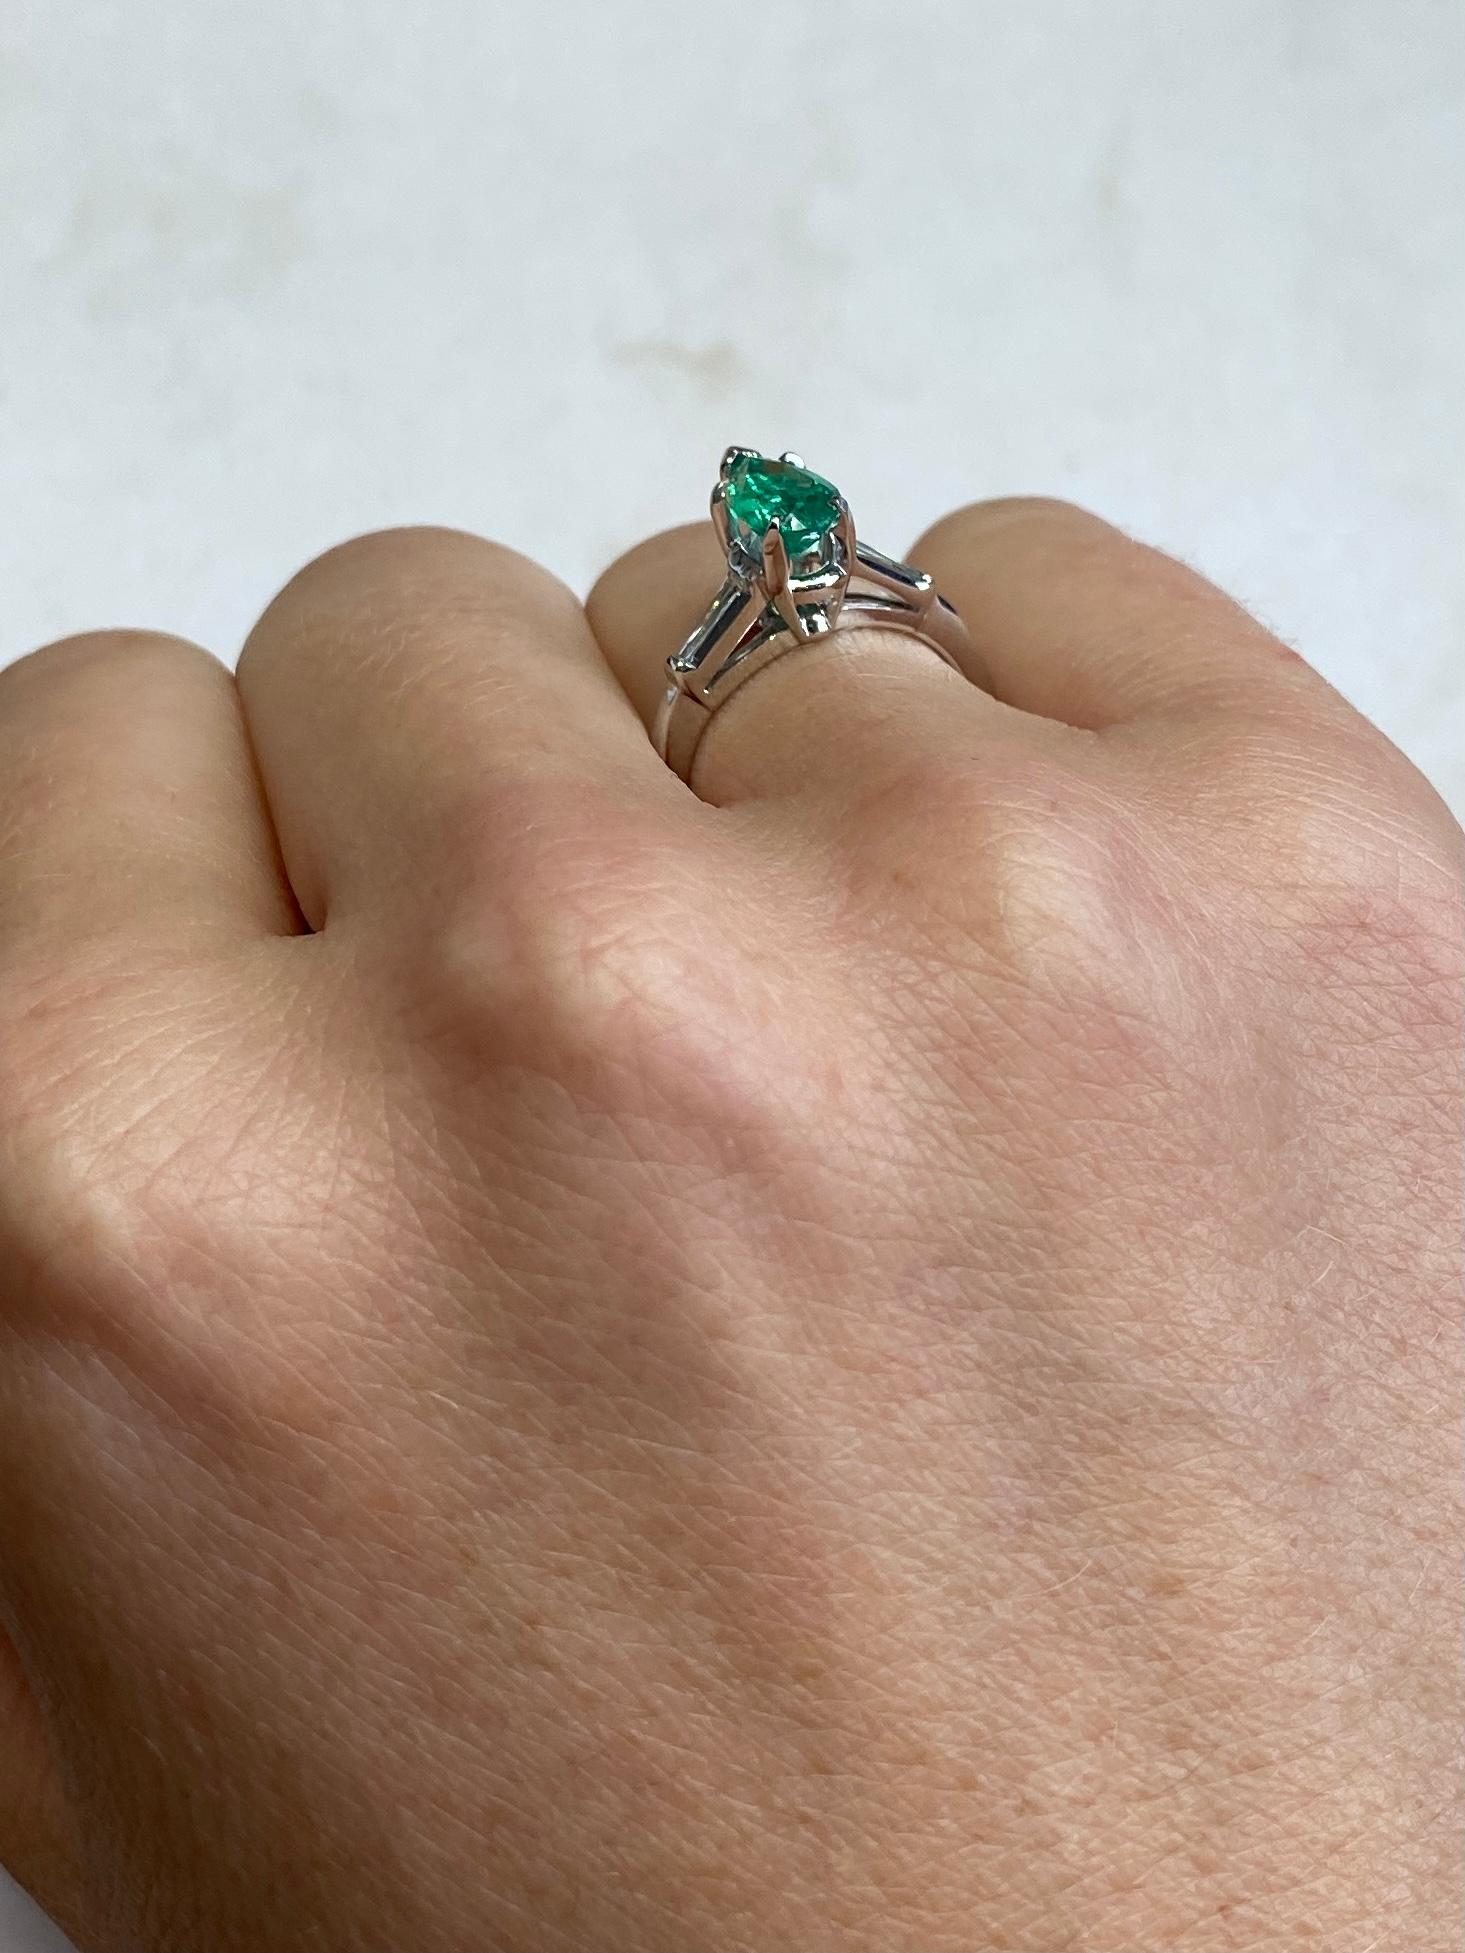 The Pear shaped Emerald in this ring measures 75ct and is a great colour. Either side sit a tapered baguette diamond measuring 10pts per shoulder. The ring is modelled out of platinum.  

Ring Size: J 1/2 or 5
Height Off Finger: 8mm

Weight: 4.1g